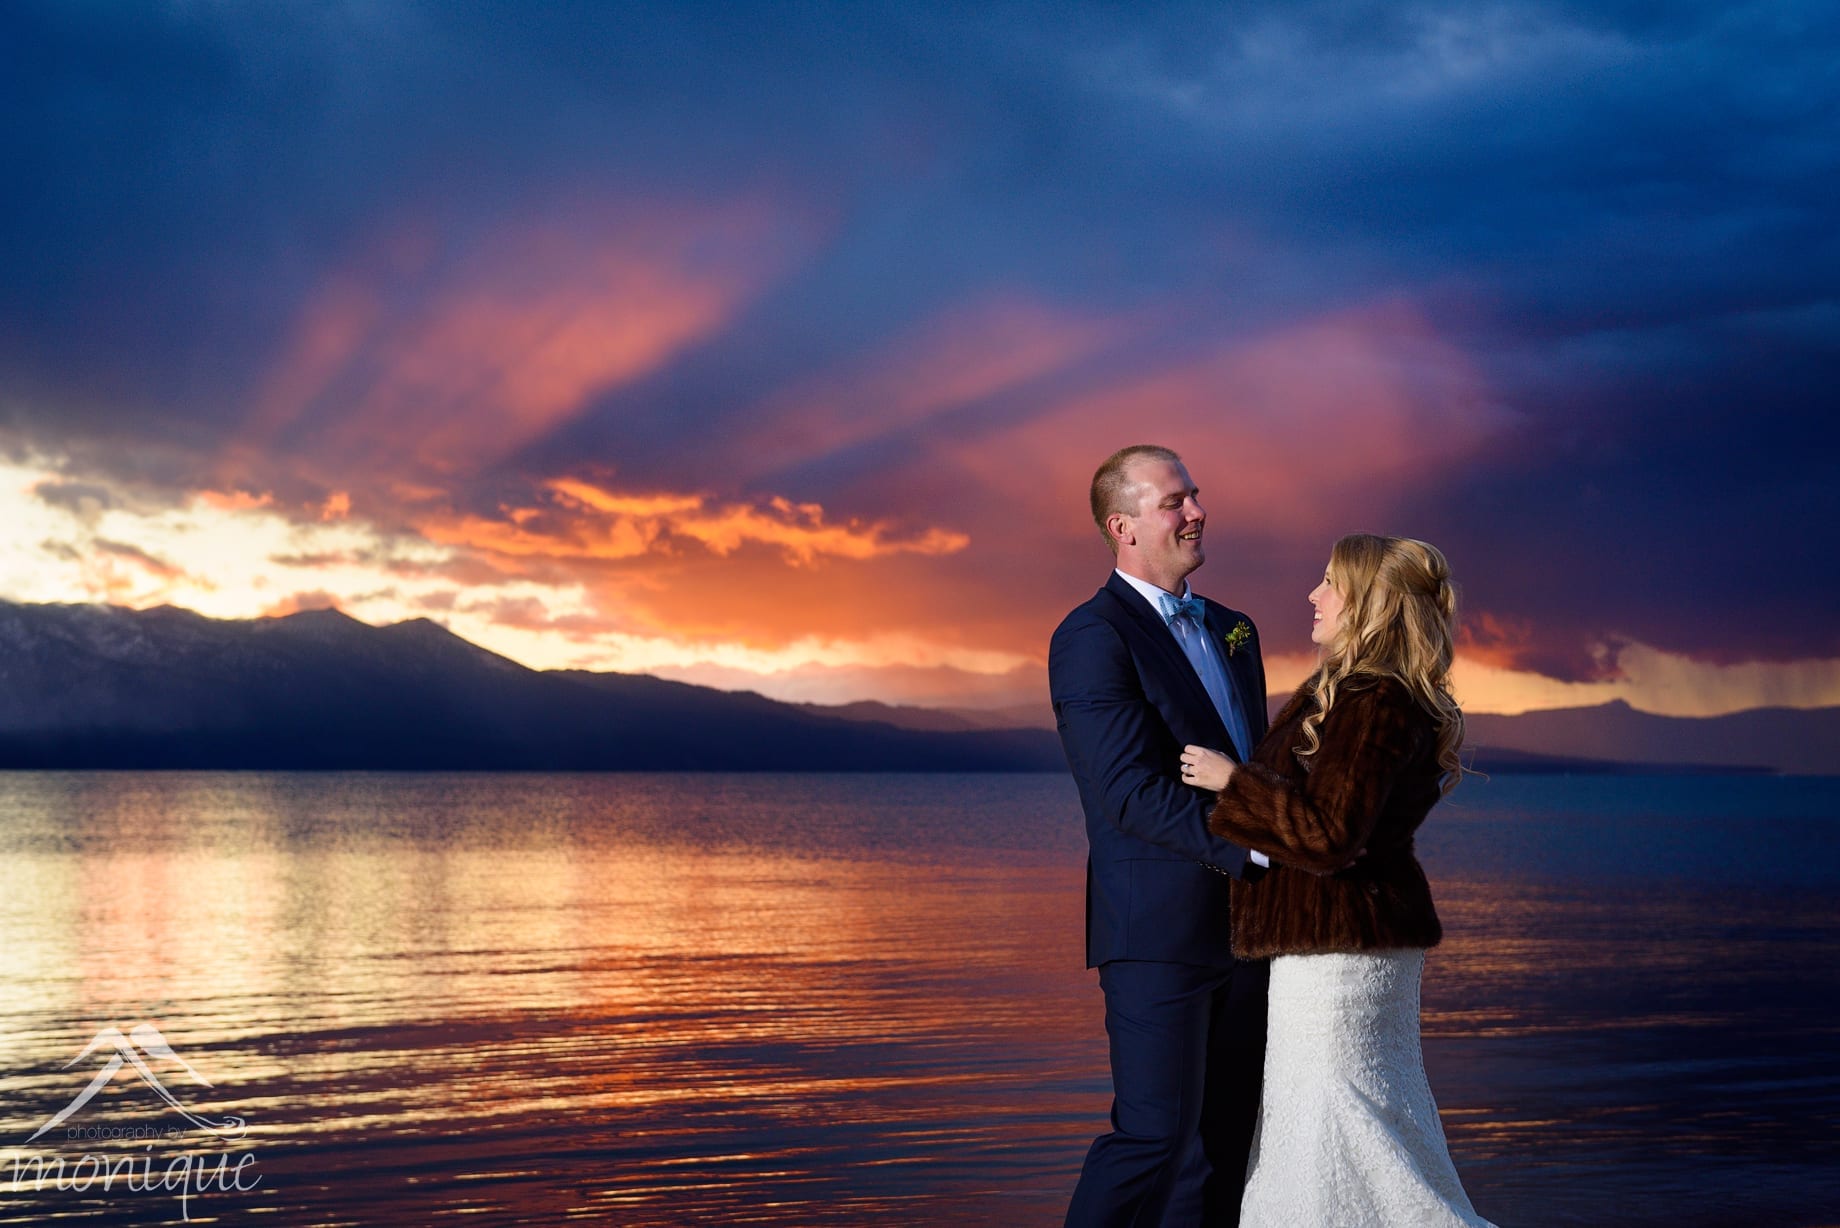 Edgewood wedding photography with an epic sunset at Lake Tahoe by Photography by Monique best of Tahoe